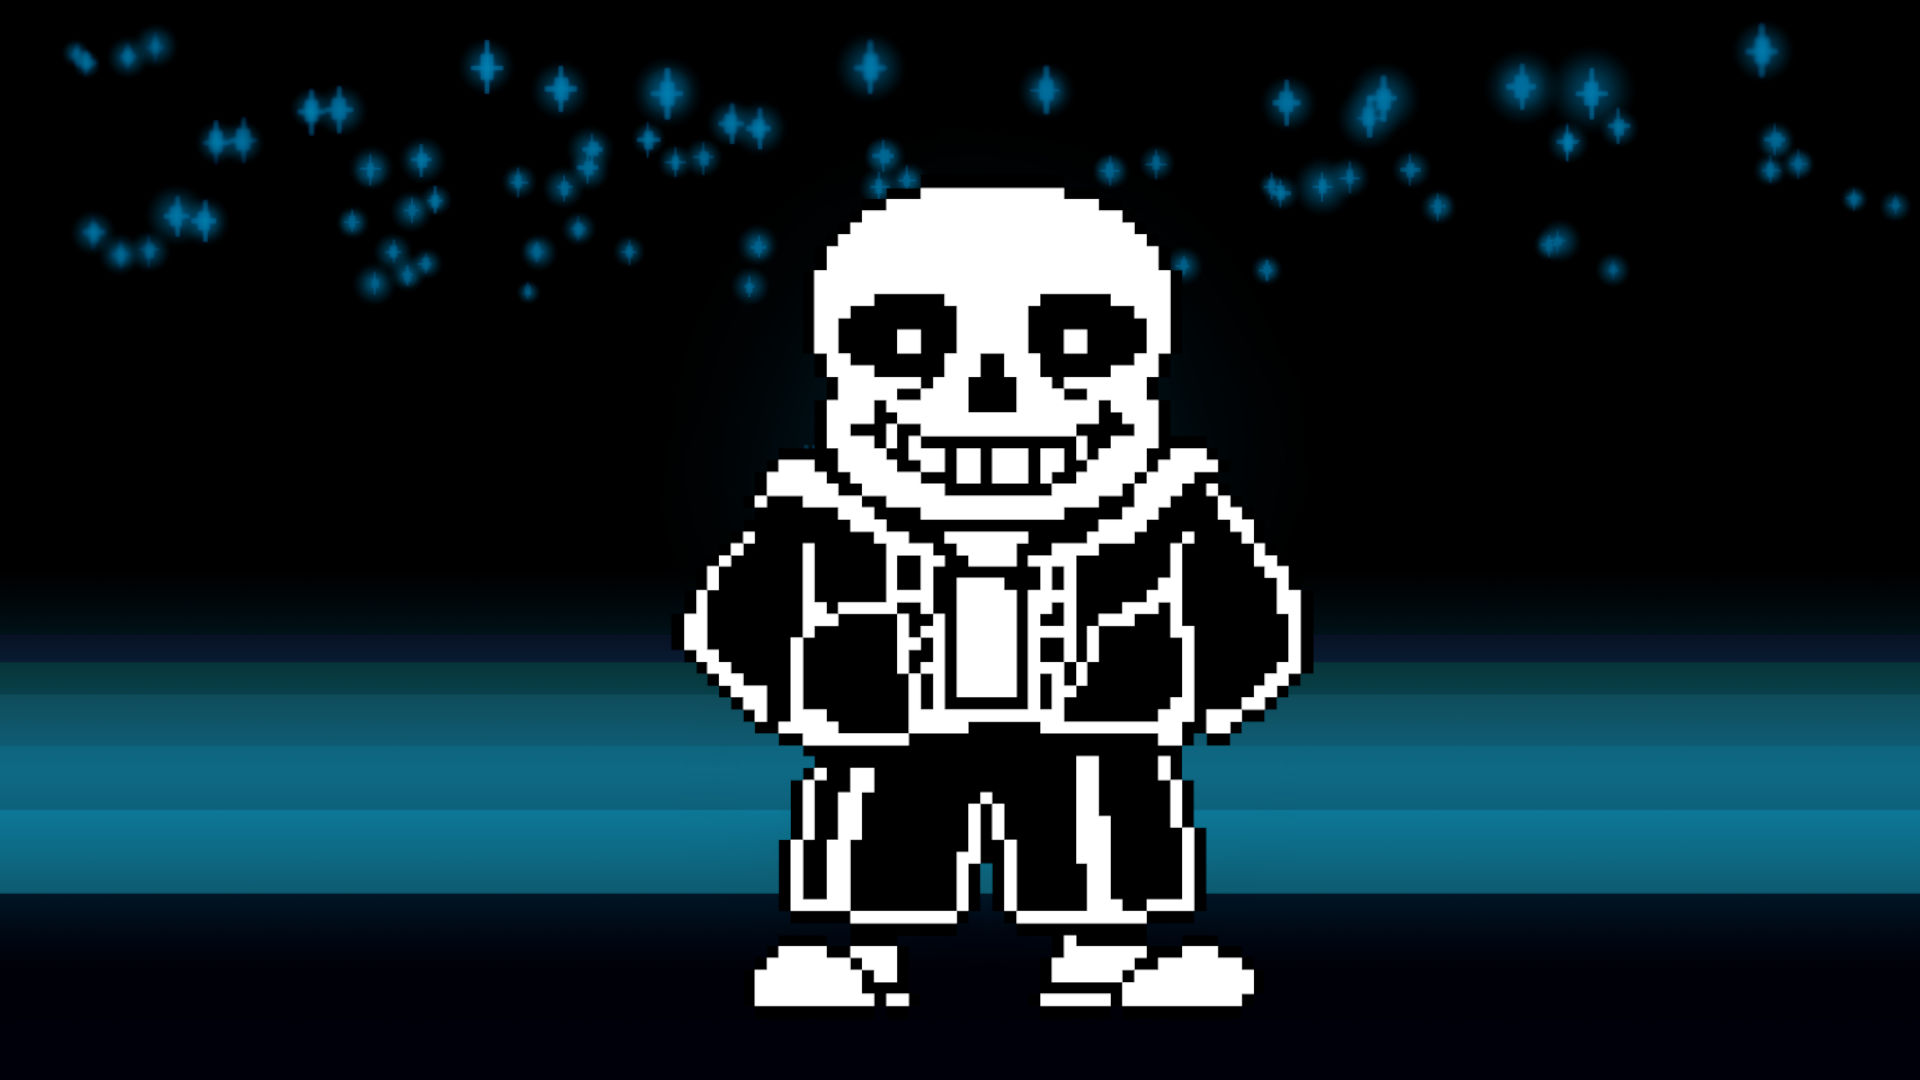 Undertale - Papyrus boss fight strategy, how to spare Papyrus and